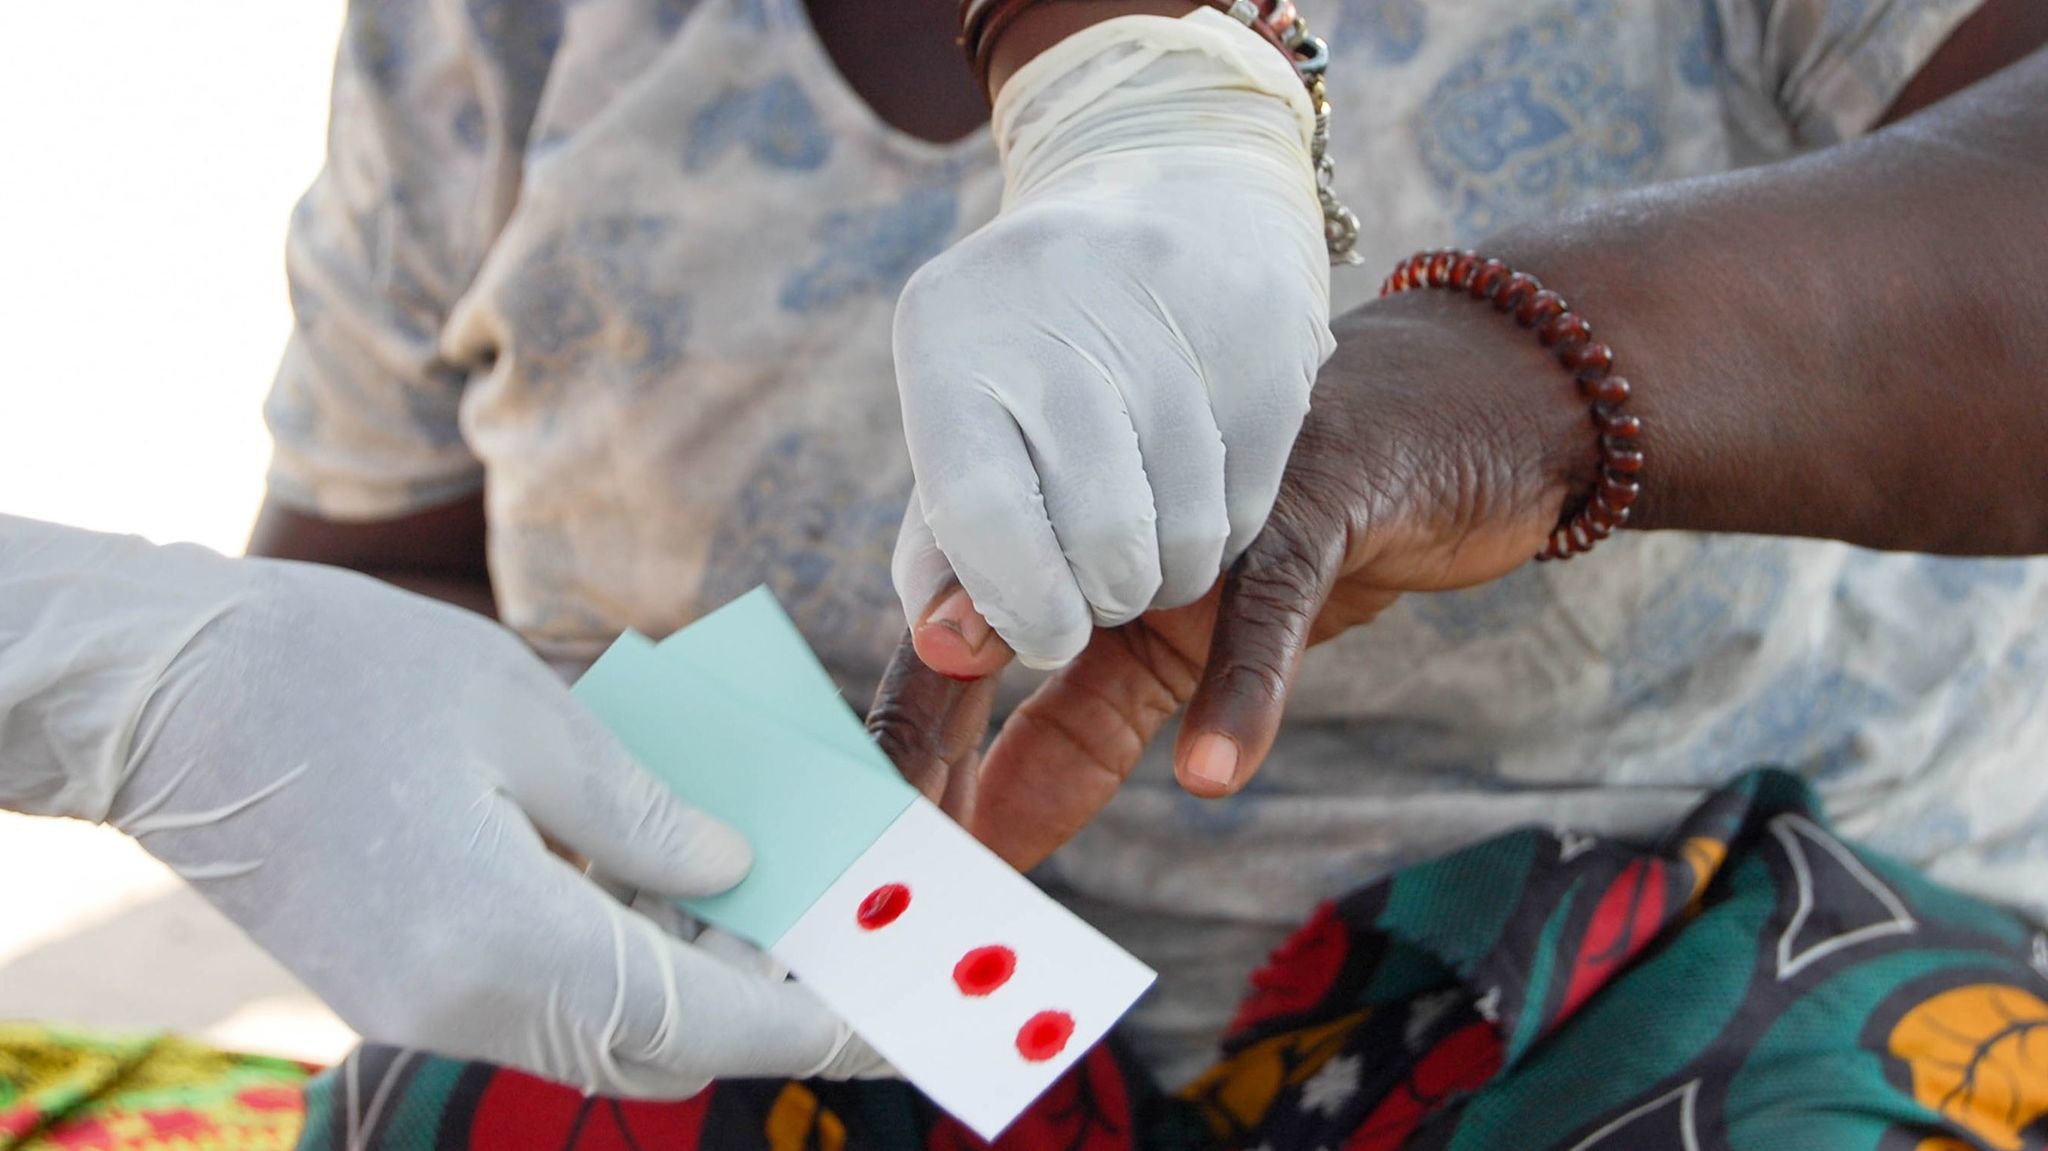 Contact tracing for malaria study